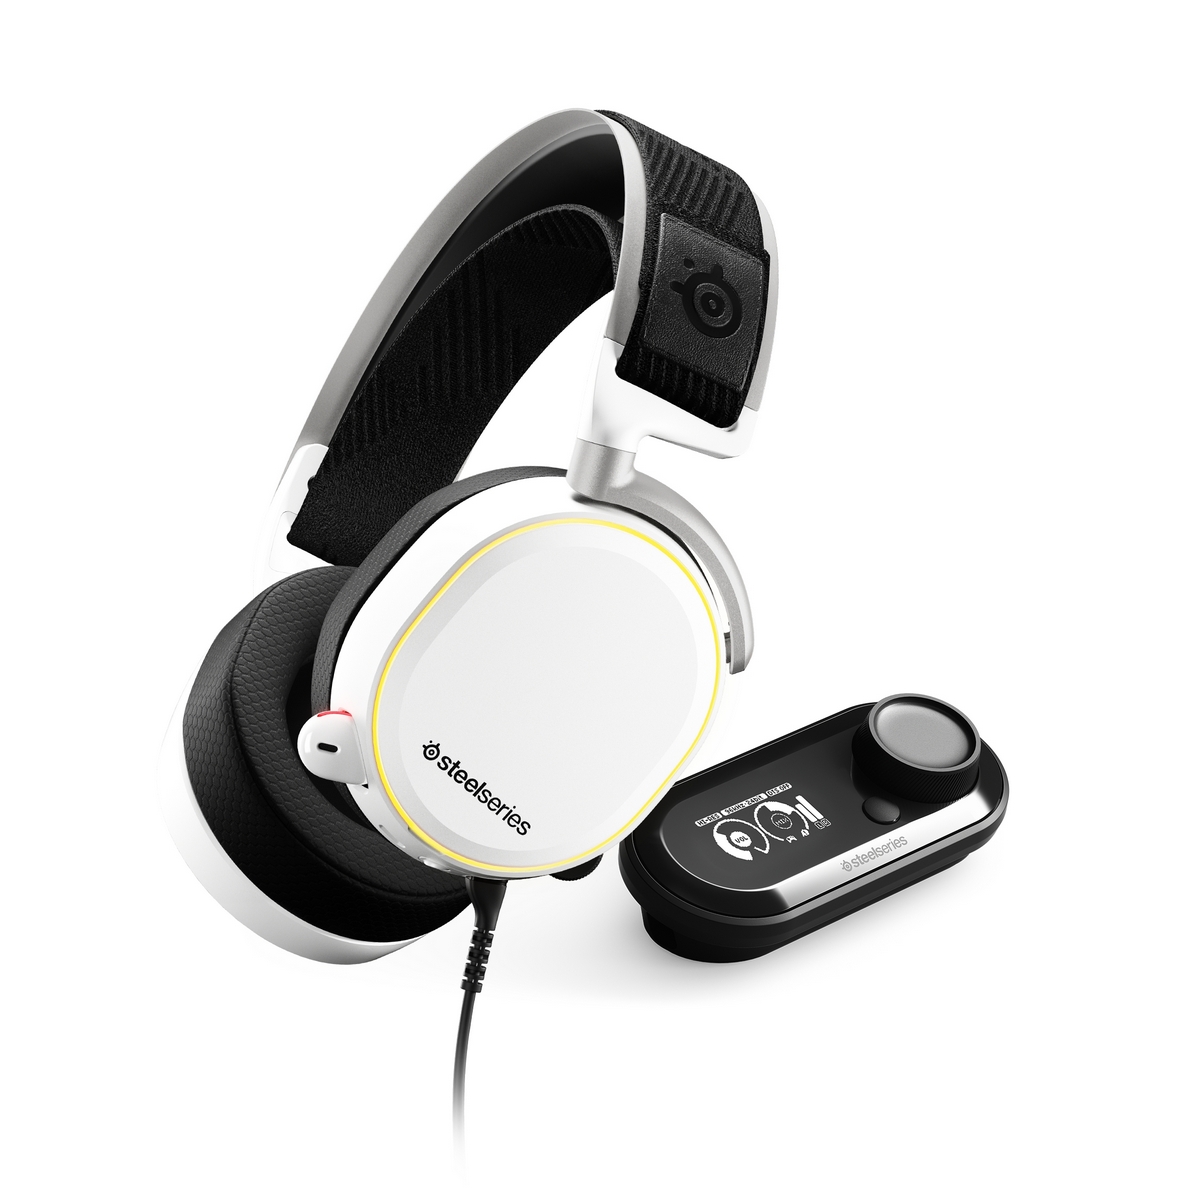 SteelSeries - SteelSeries Arctis Pro USB High Fidelity Gaming Headset and GameDAC Amplifier Bundle White (61454)